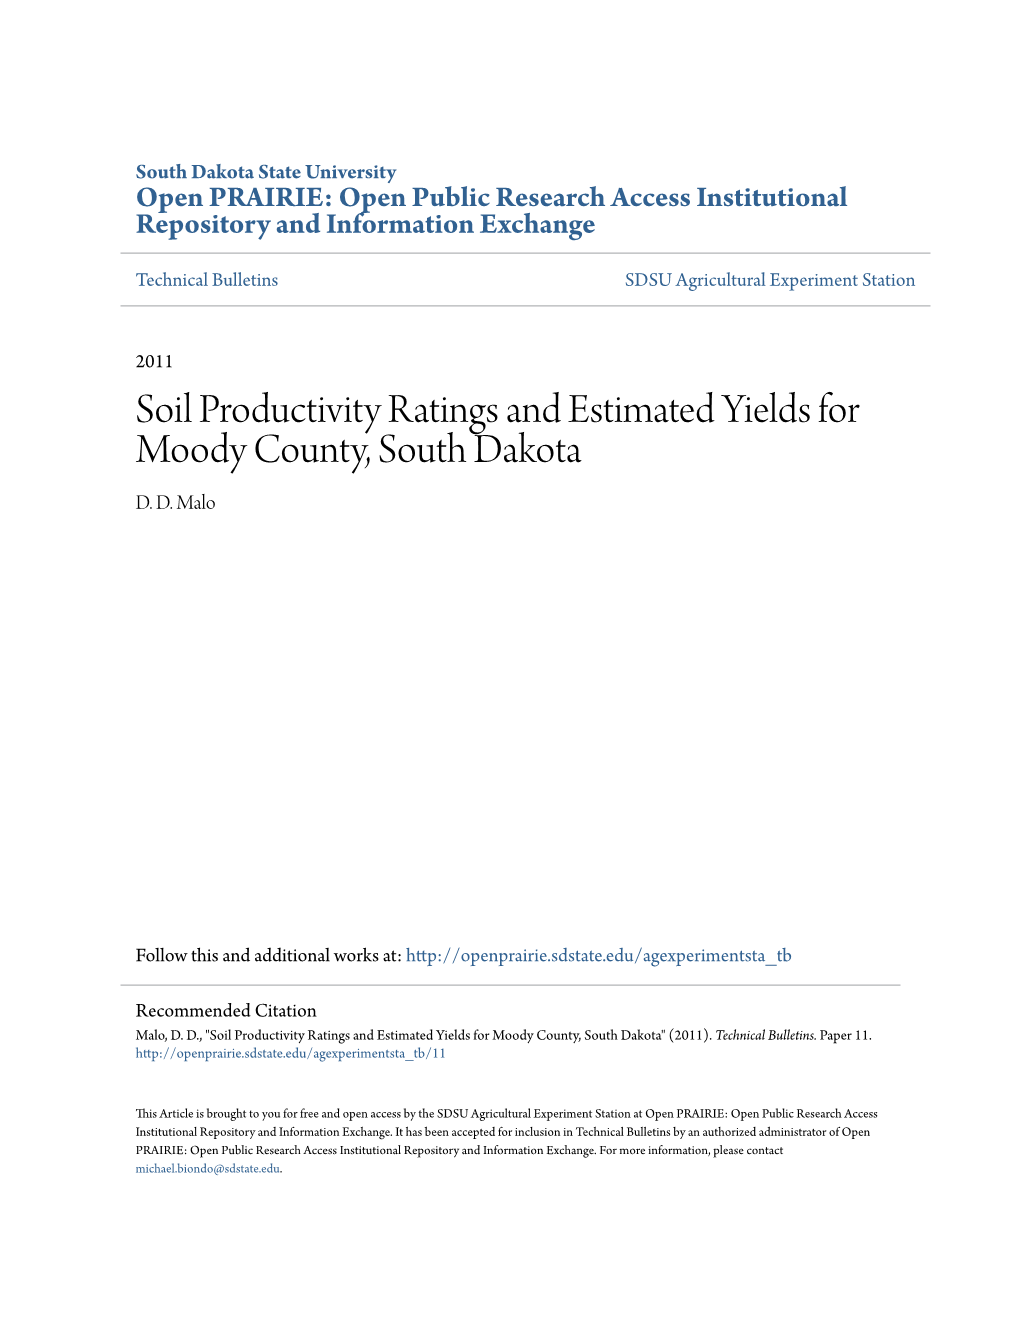 Soil Productivity Ratings and Estimated Yields for Moody County, South Dakota D